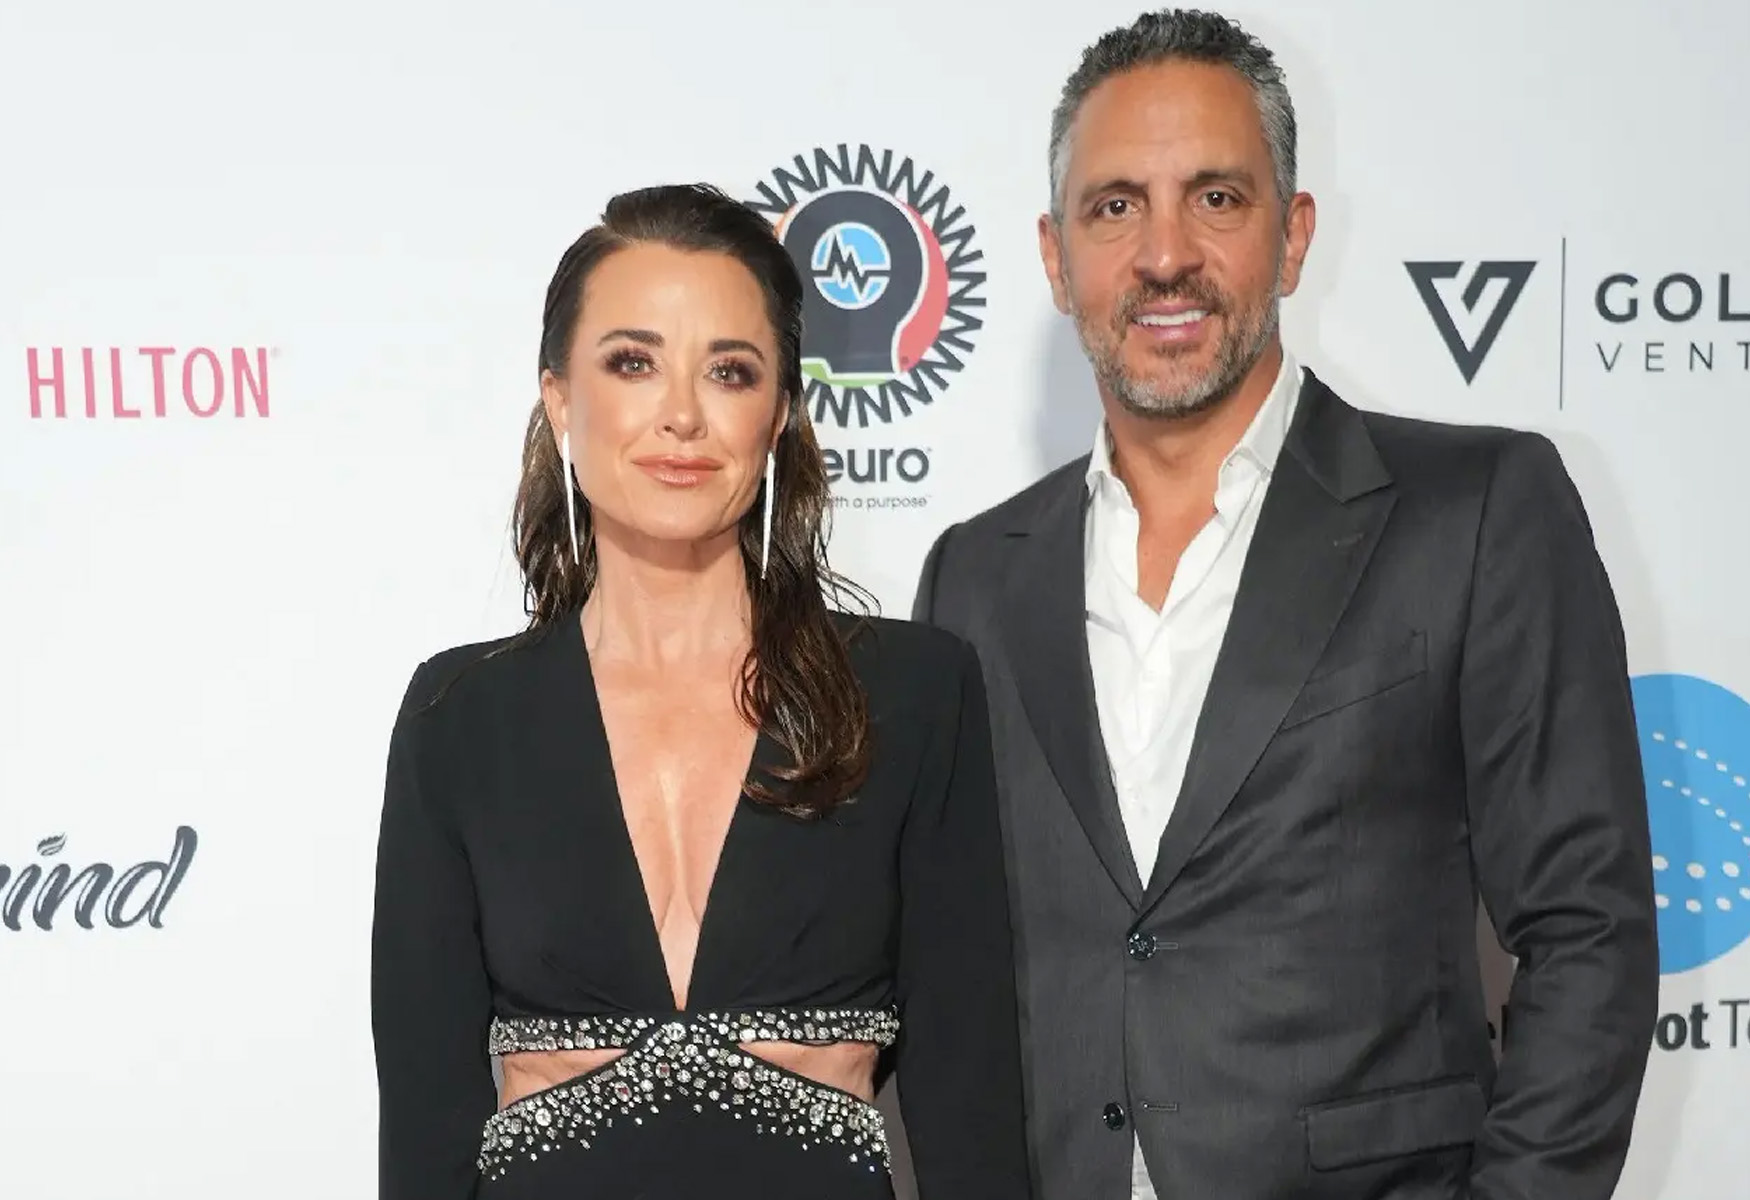 Kyle Richards Reveals Conflict With Mauricio Umansky Over Online Interactions